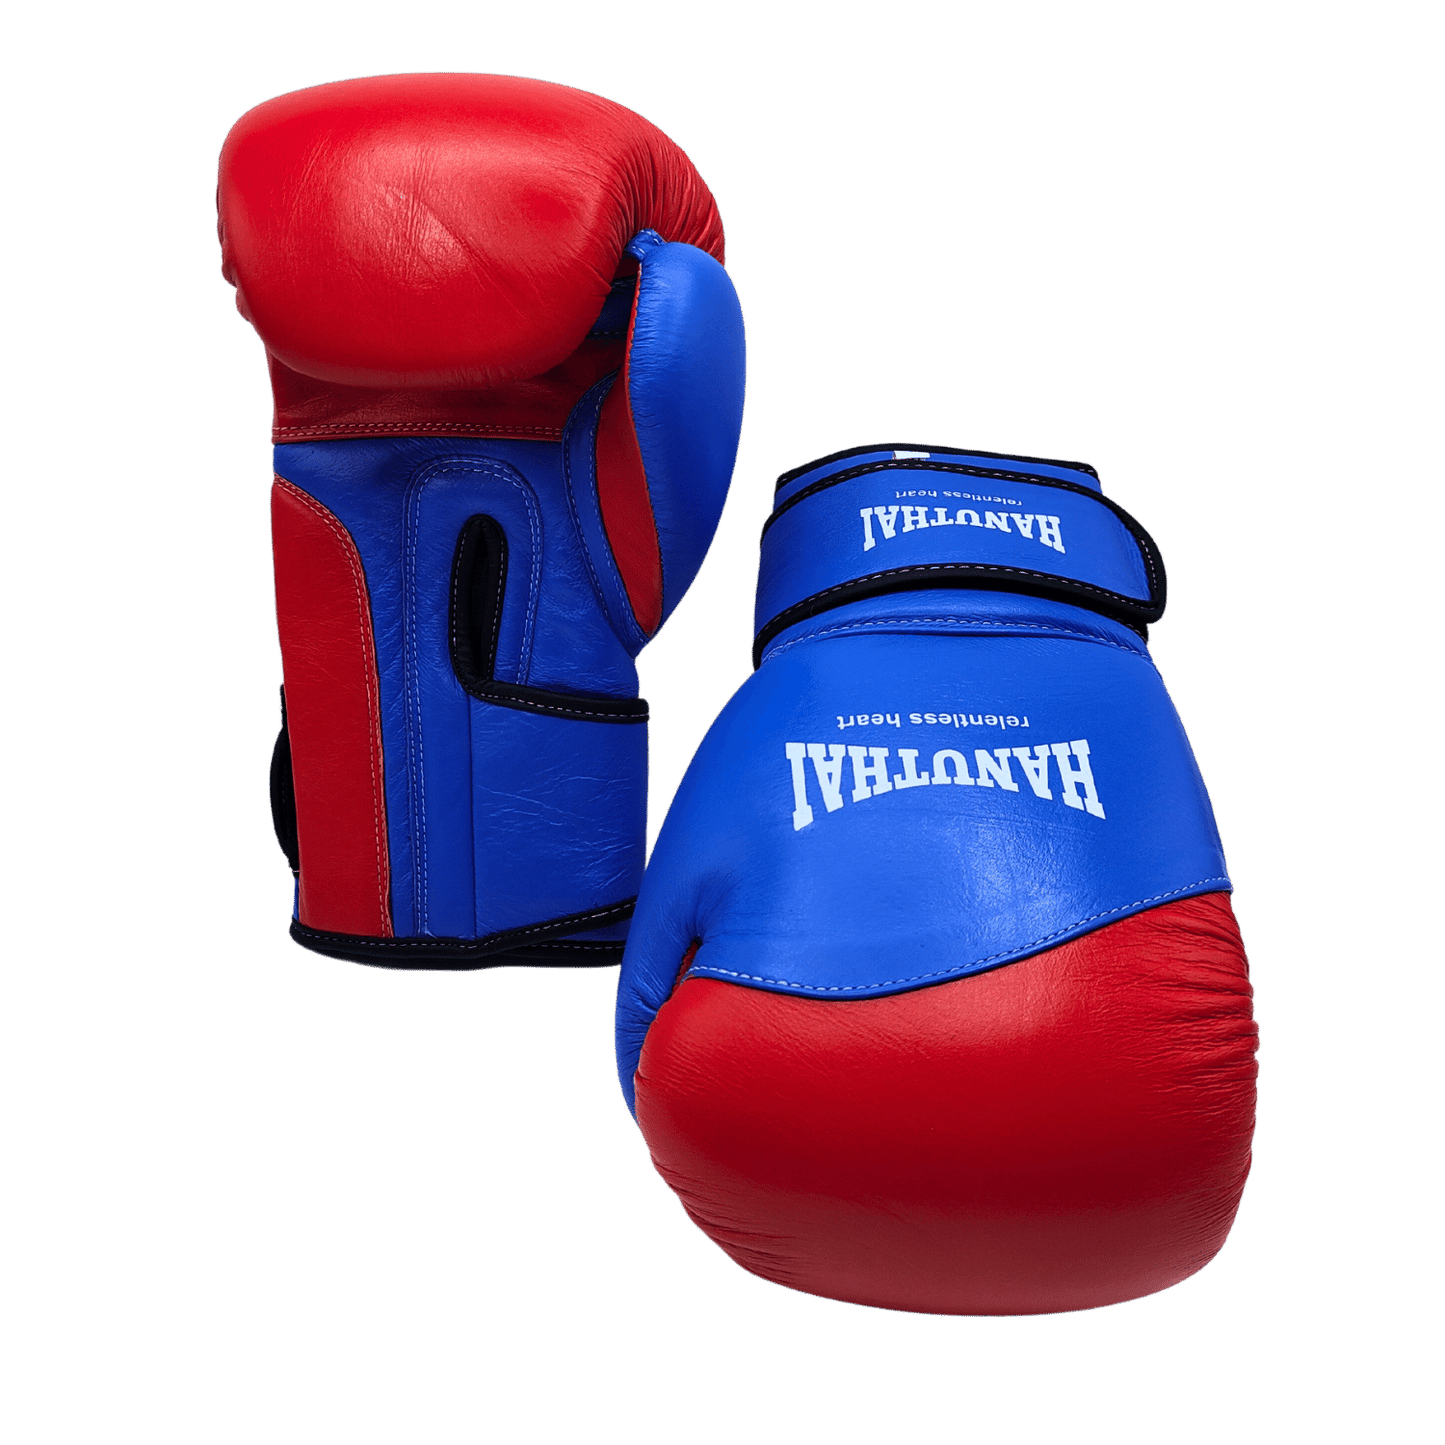 Hanuthai Muay Thai Boxing Gloves - Blue & red, crafted from genuine leather.